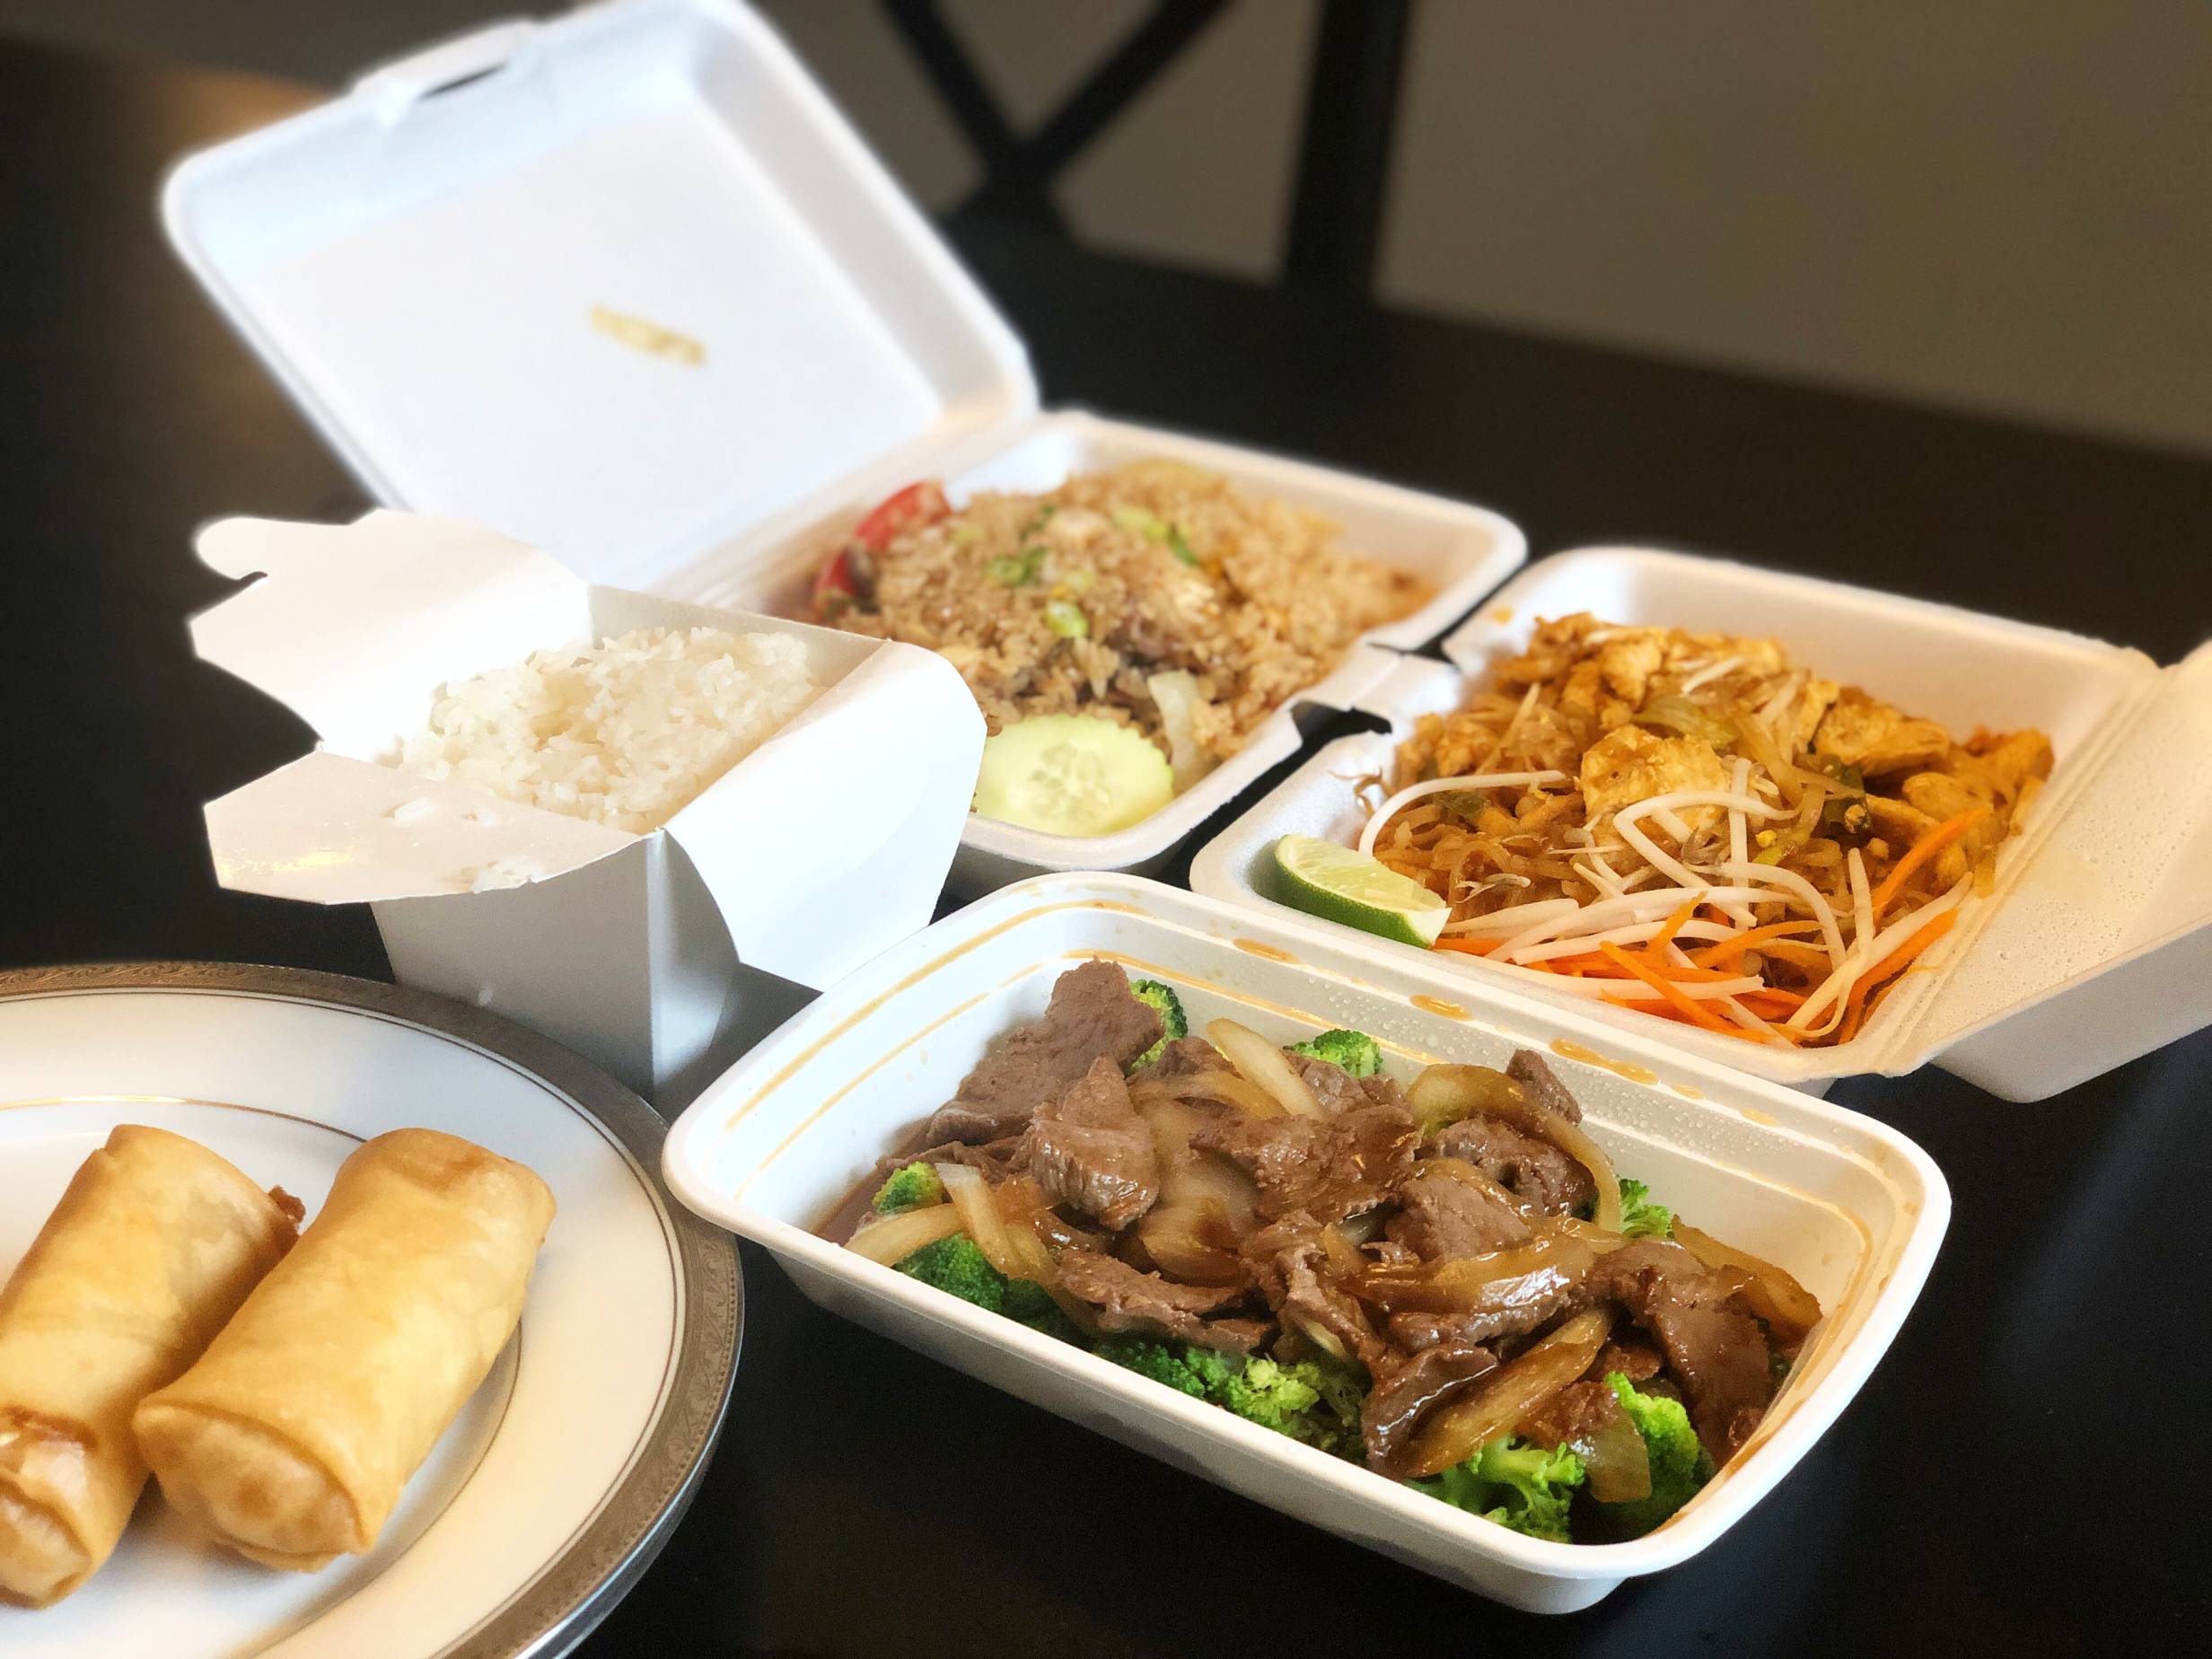 All the takeout options for the author's dinner. Two egg rolls on a plate, a carton of steamed white rice, a plastic container of beef and broccoli, a container of pad thai, and a container of fried rice on a black table. Photo by Alyssa Buckley.